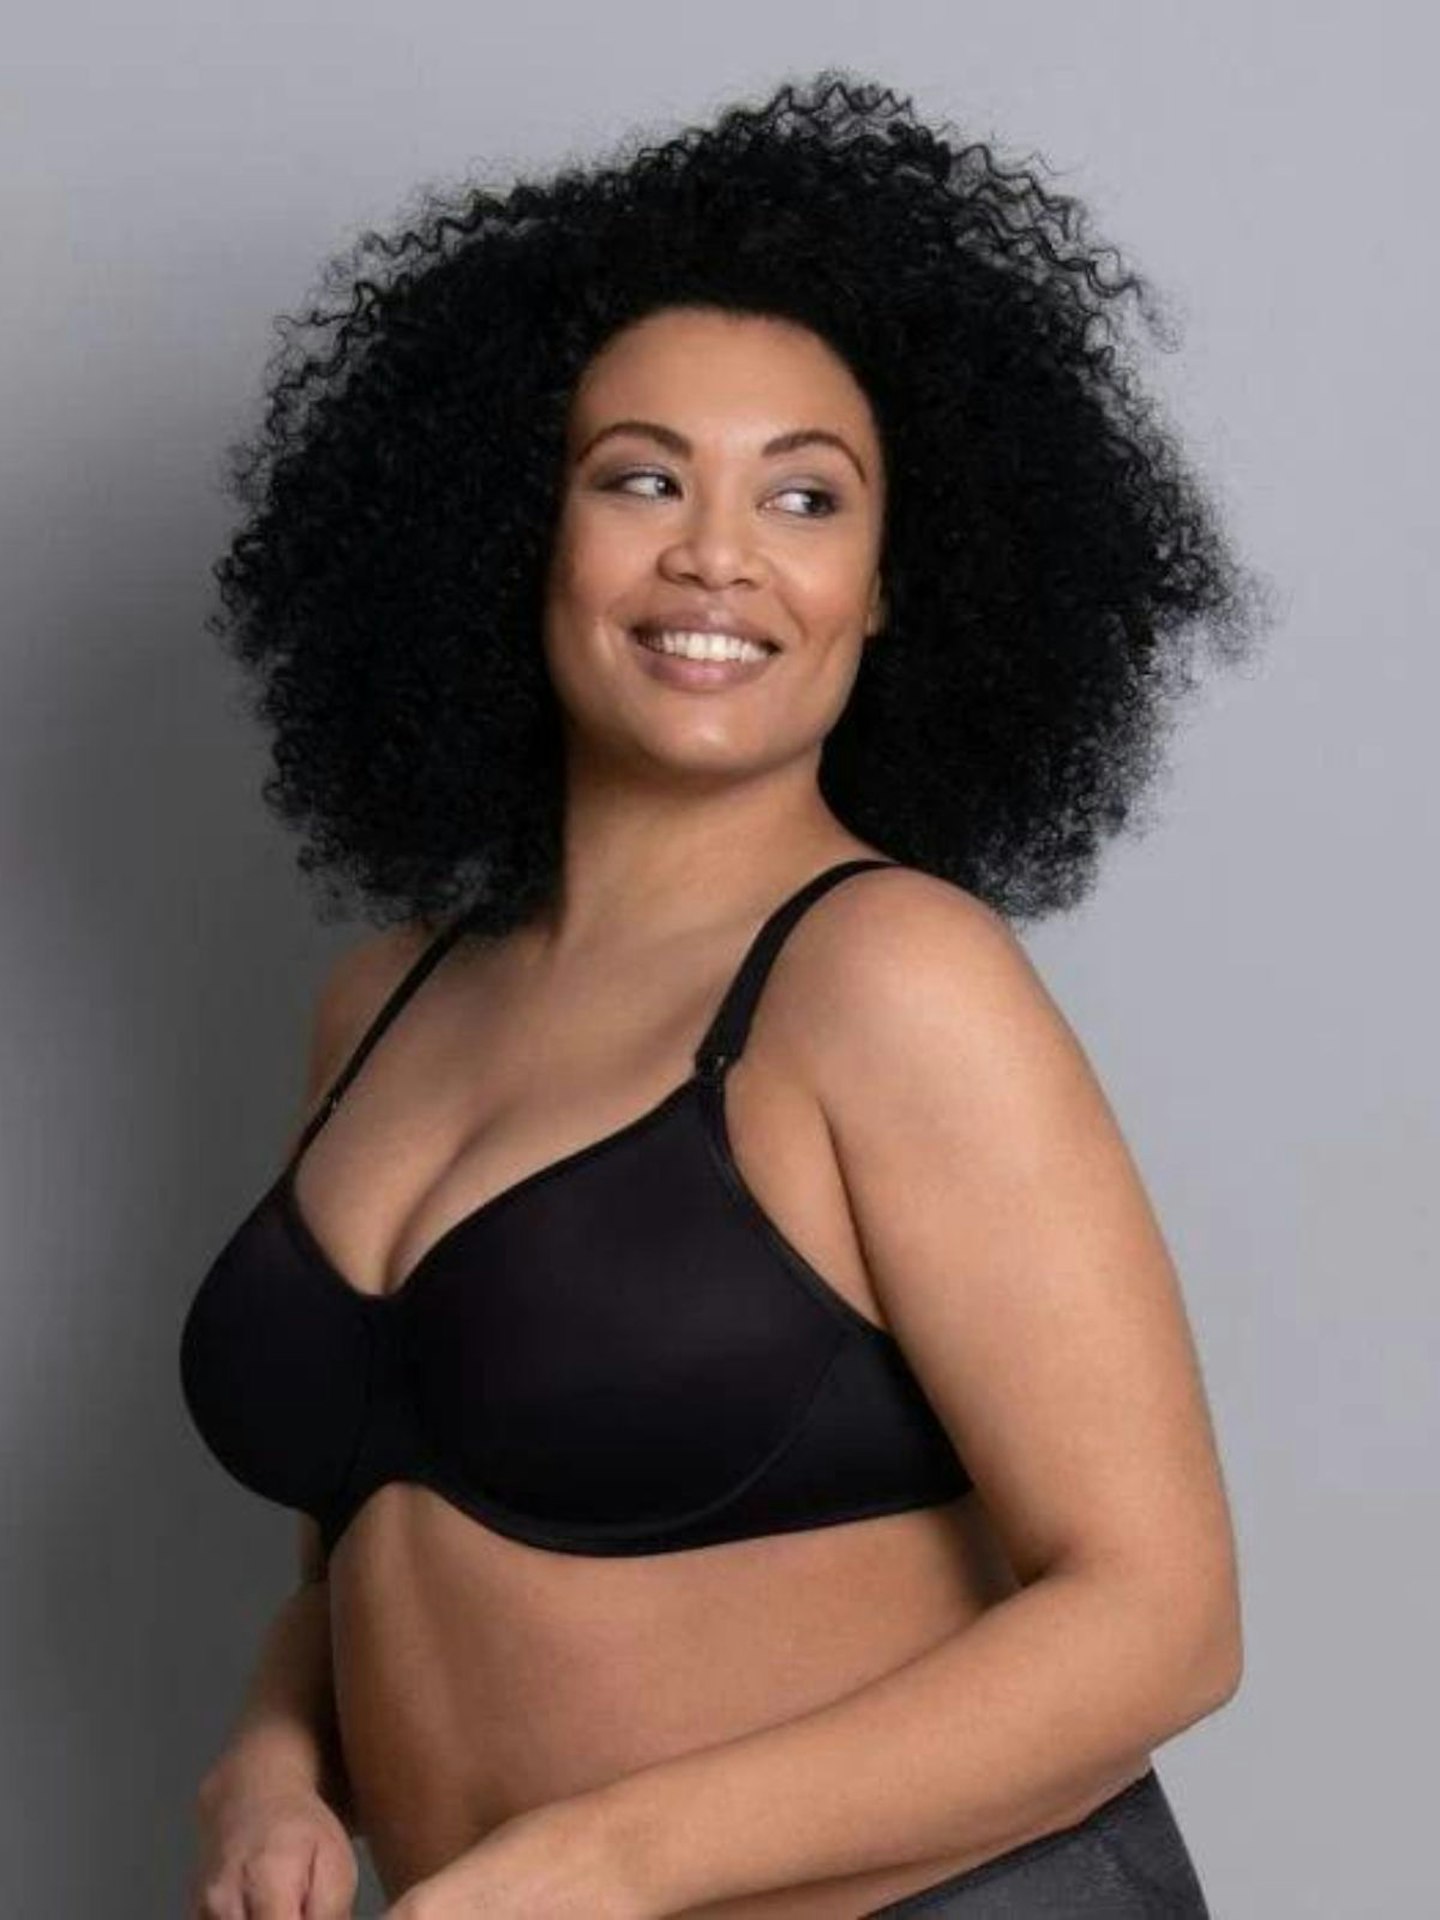 The best nursing bras for post-partum and beyond 2024